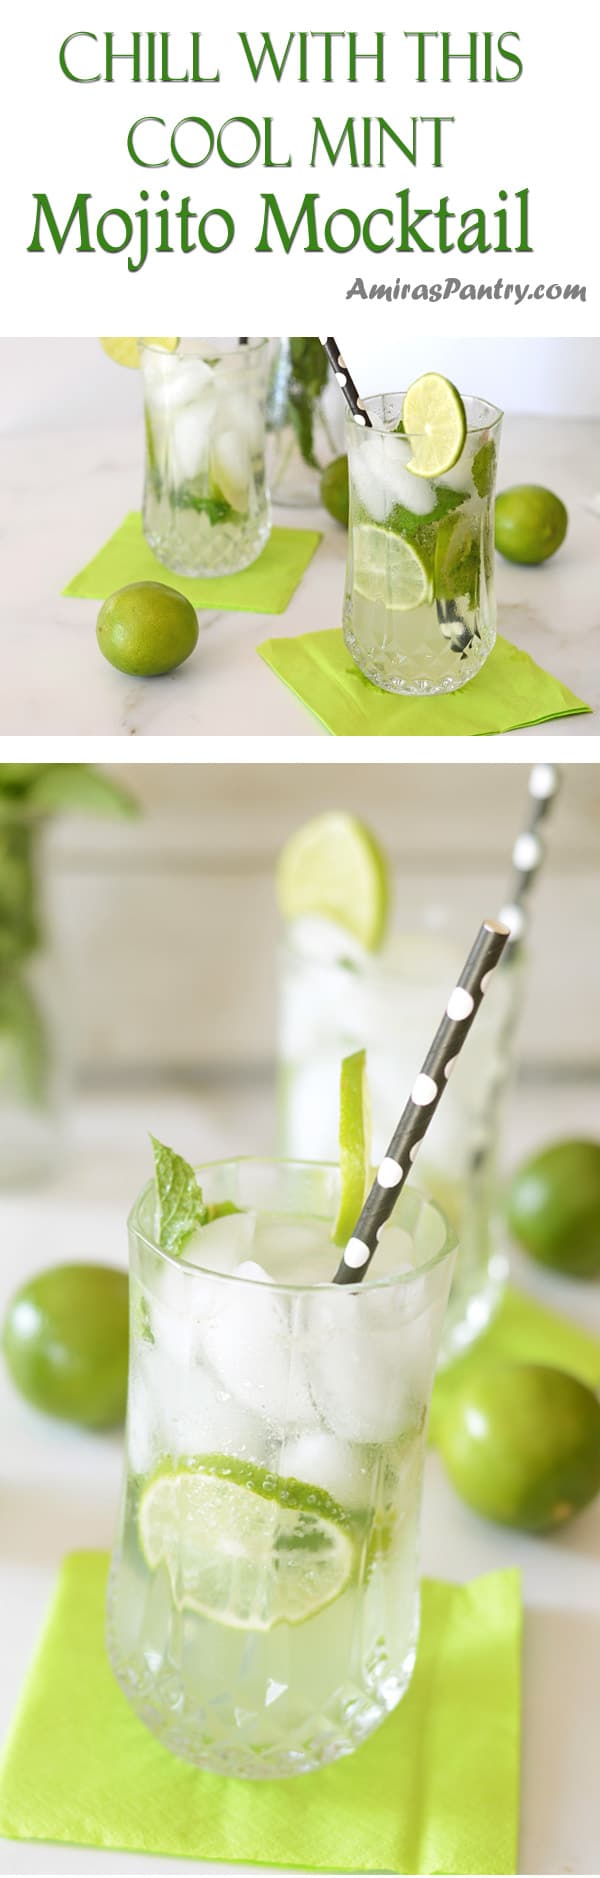 Chill With This Cool Mint Mojito Mocktail Amira S Pantry,Jack O Lantern Faces Silhouette